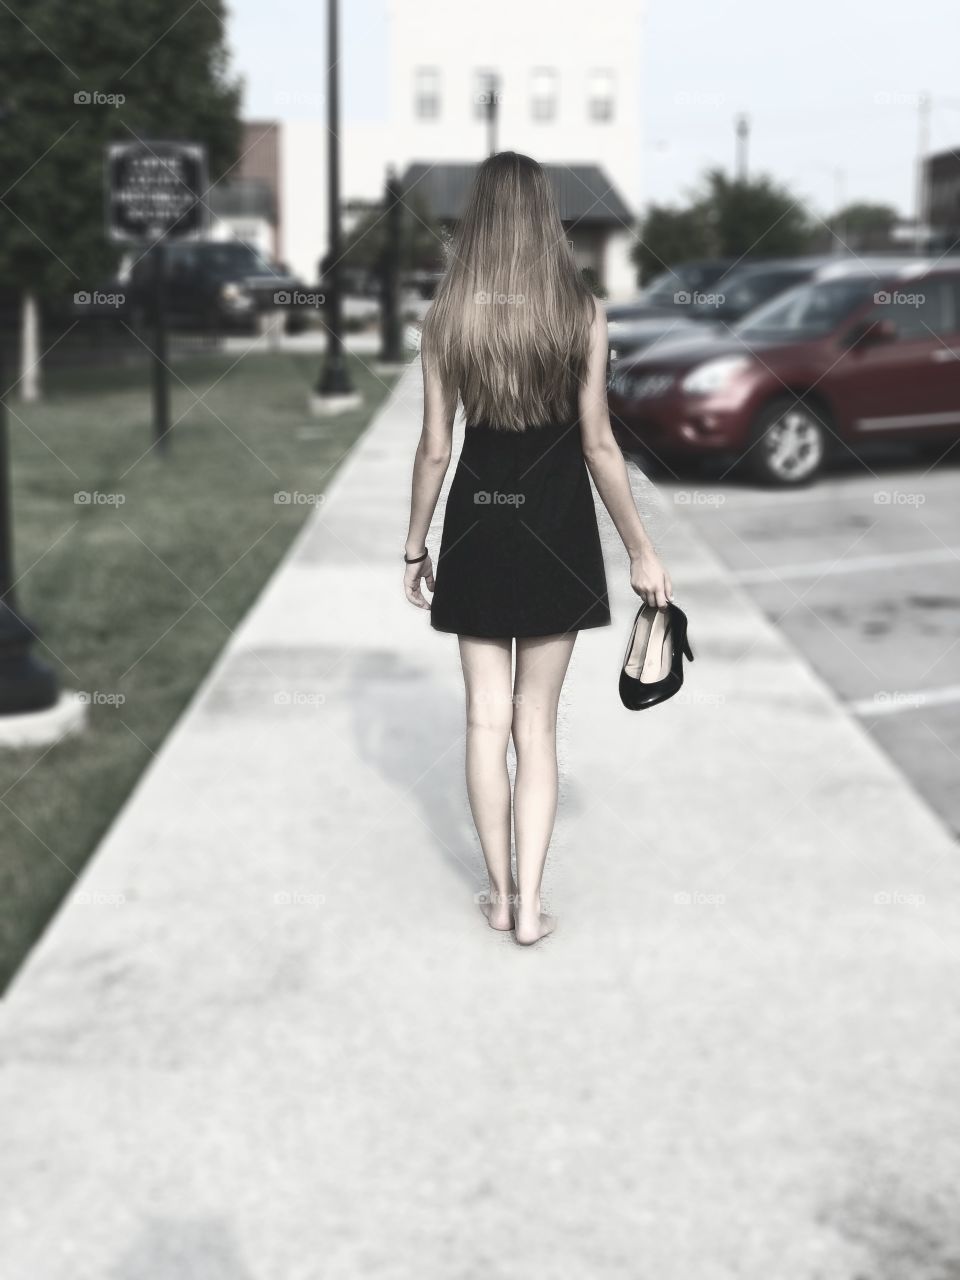 Girl walking without her shoes